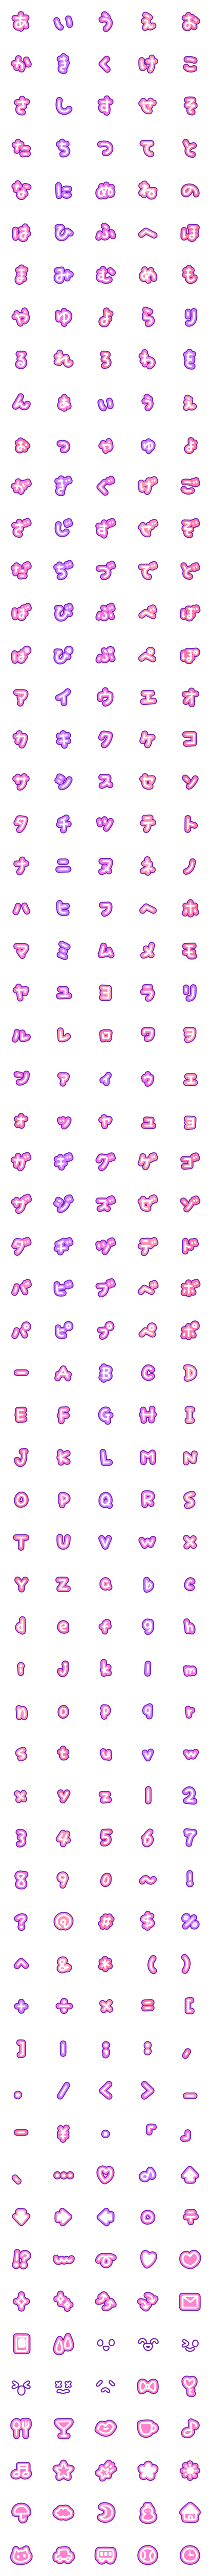 [LINE絵文字]ピンク＋紫のかわいいデコ文字+絵文字の画像一覧